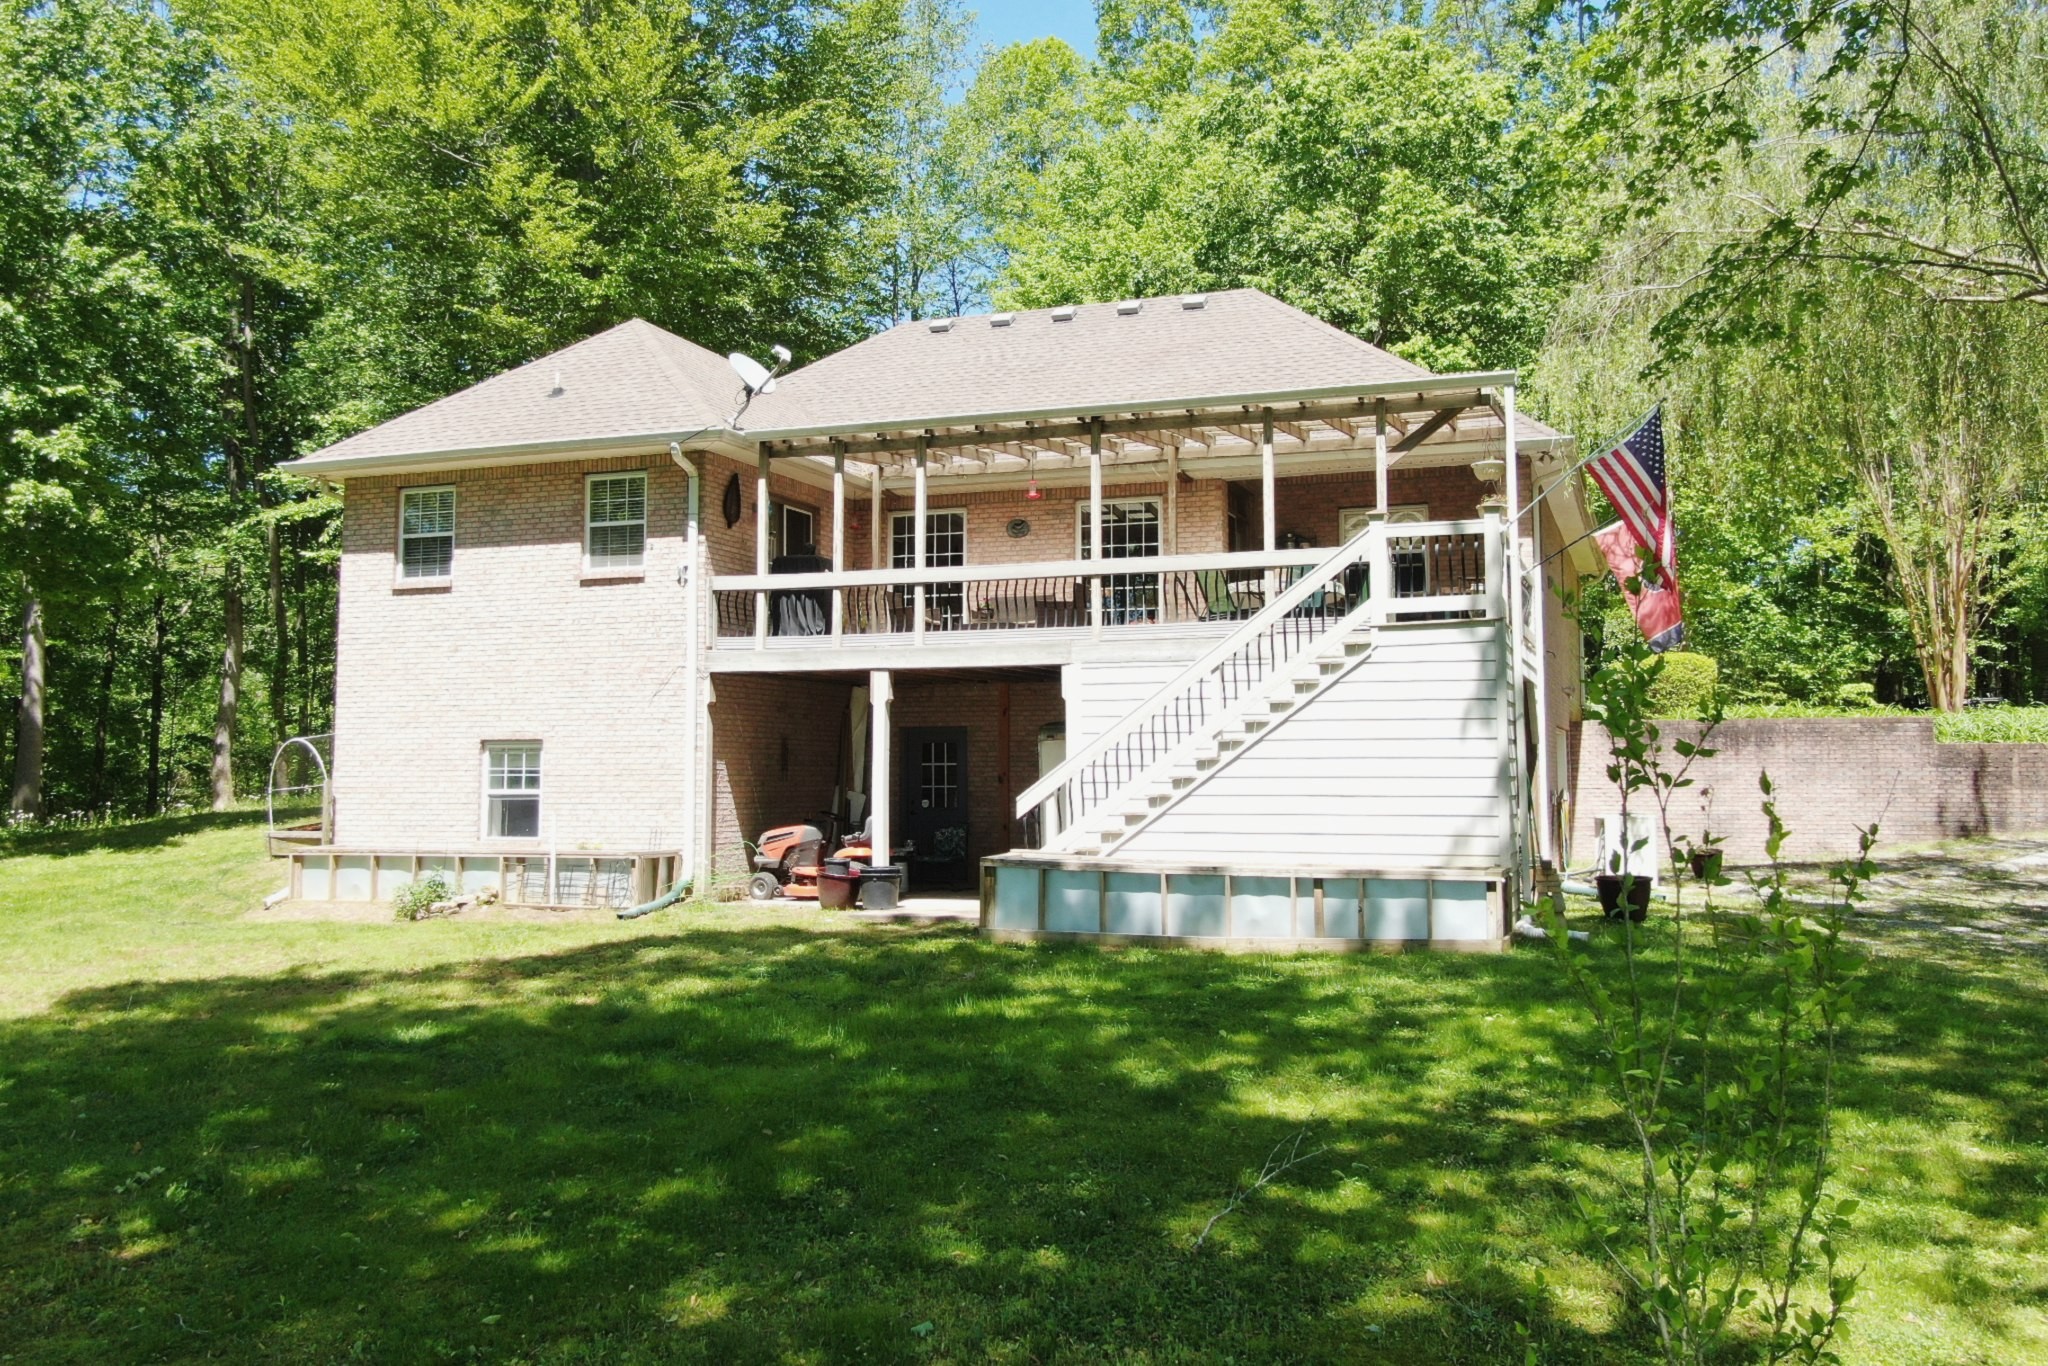 Country Home Situated on 8+ Secluded Acres in Middle TN